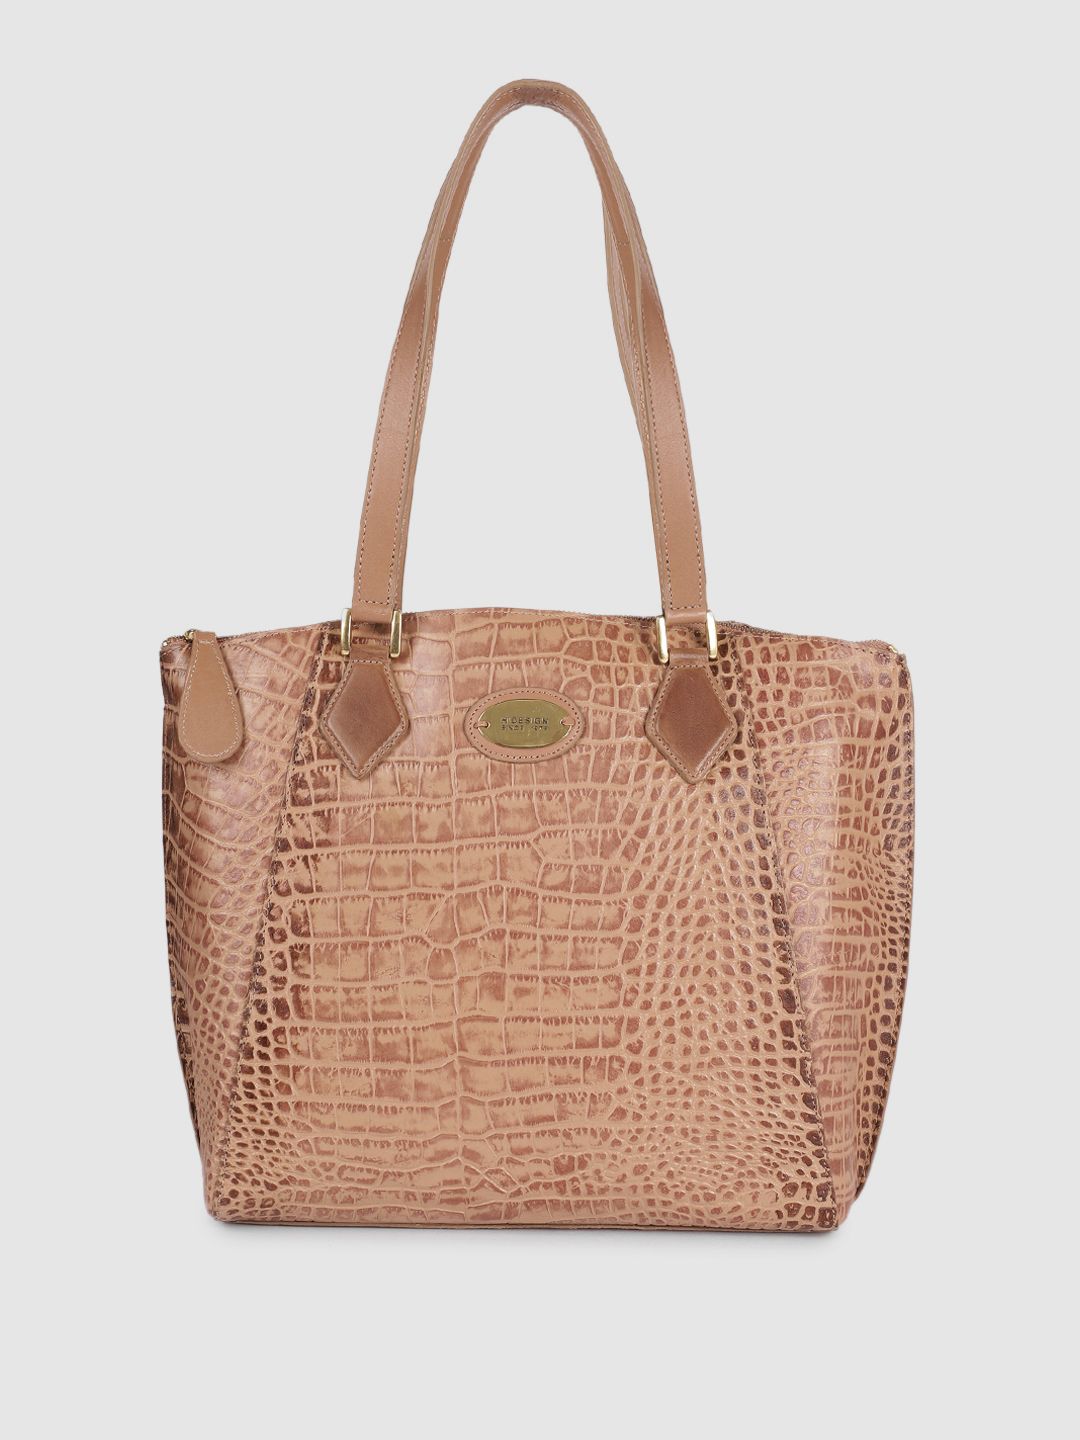 Hidesign Nude-Coloured Textured Leather Structured Shoulder Bag Price in India